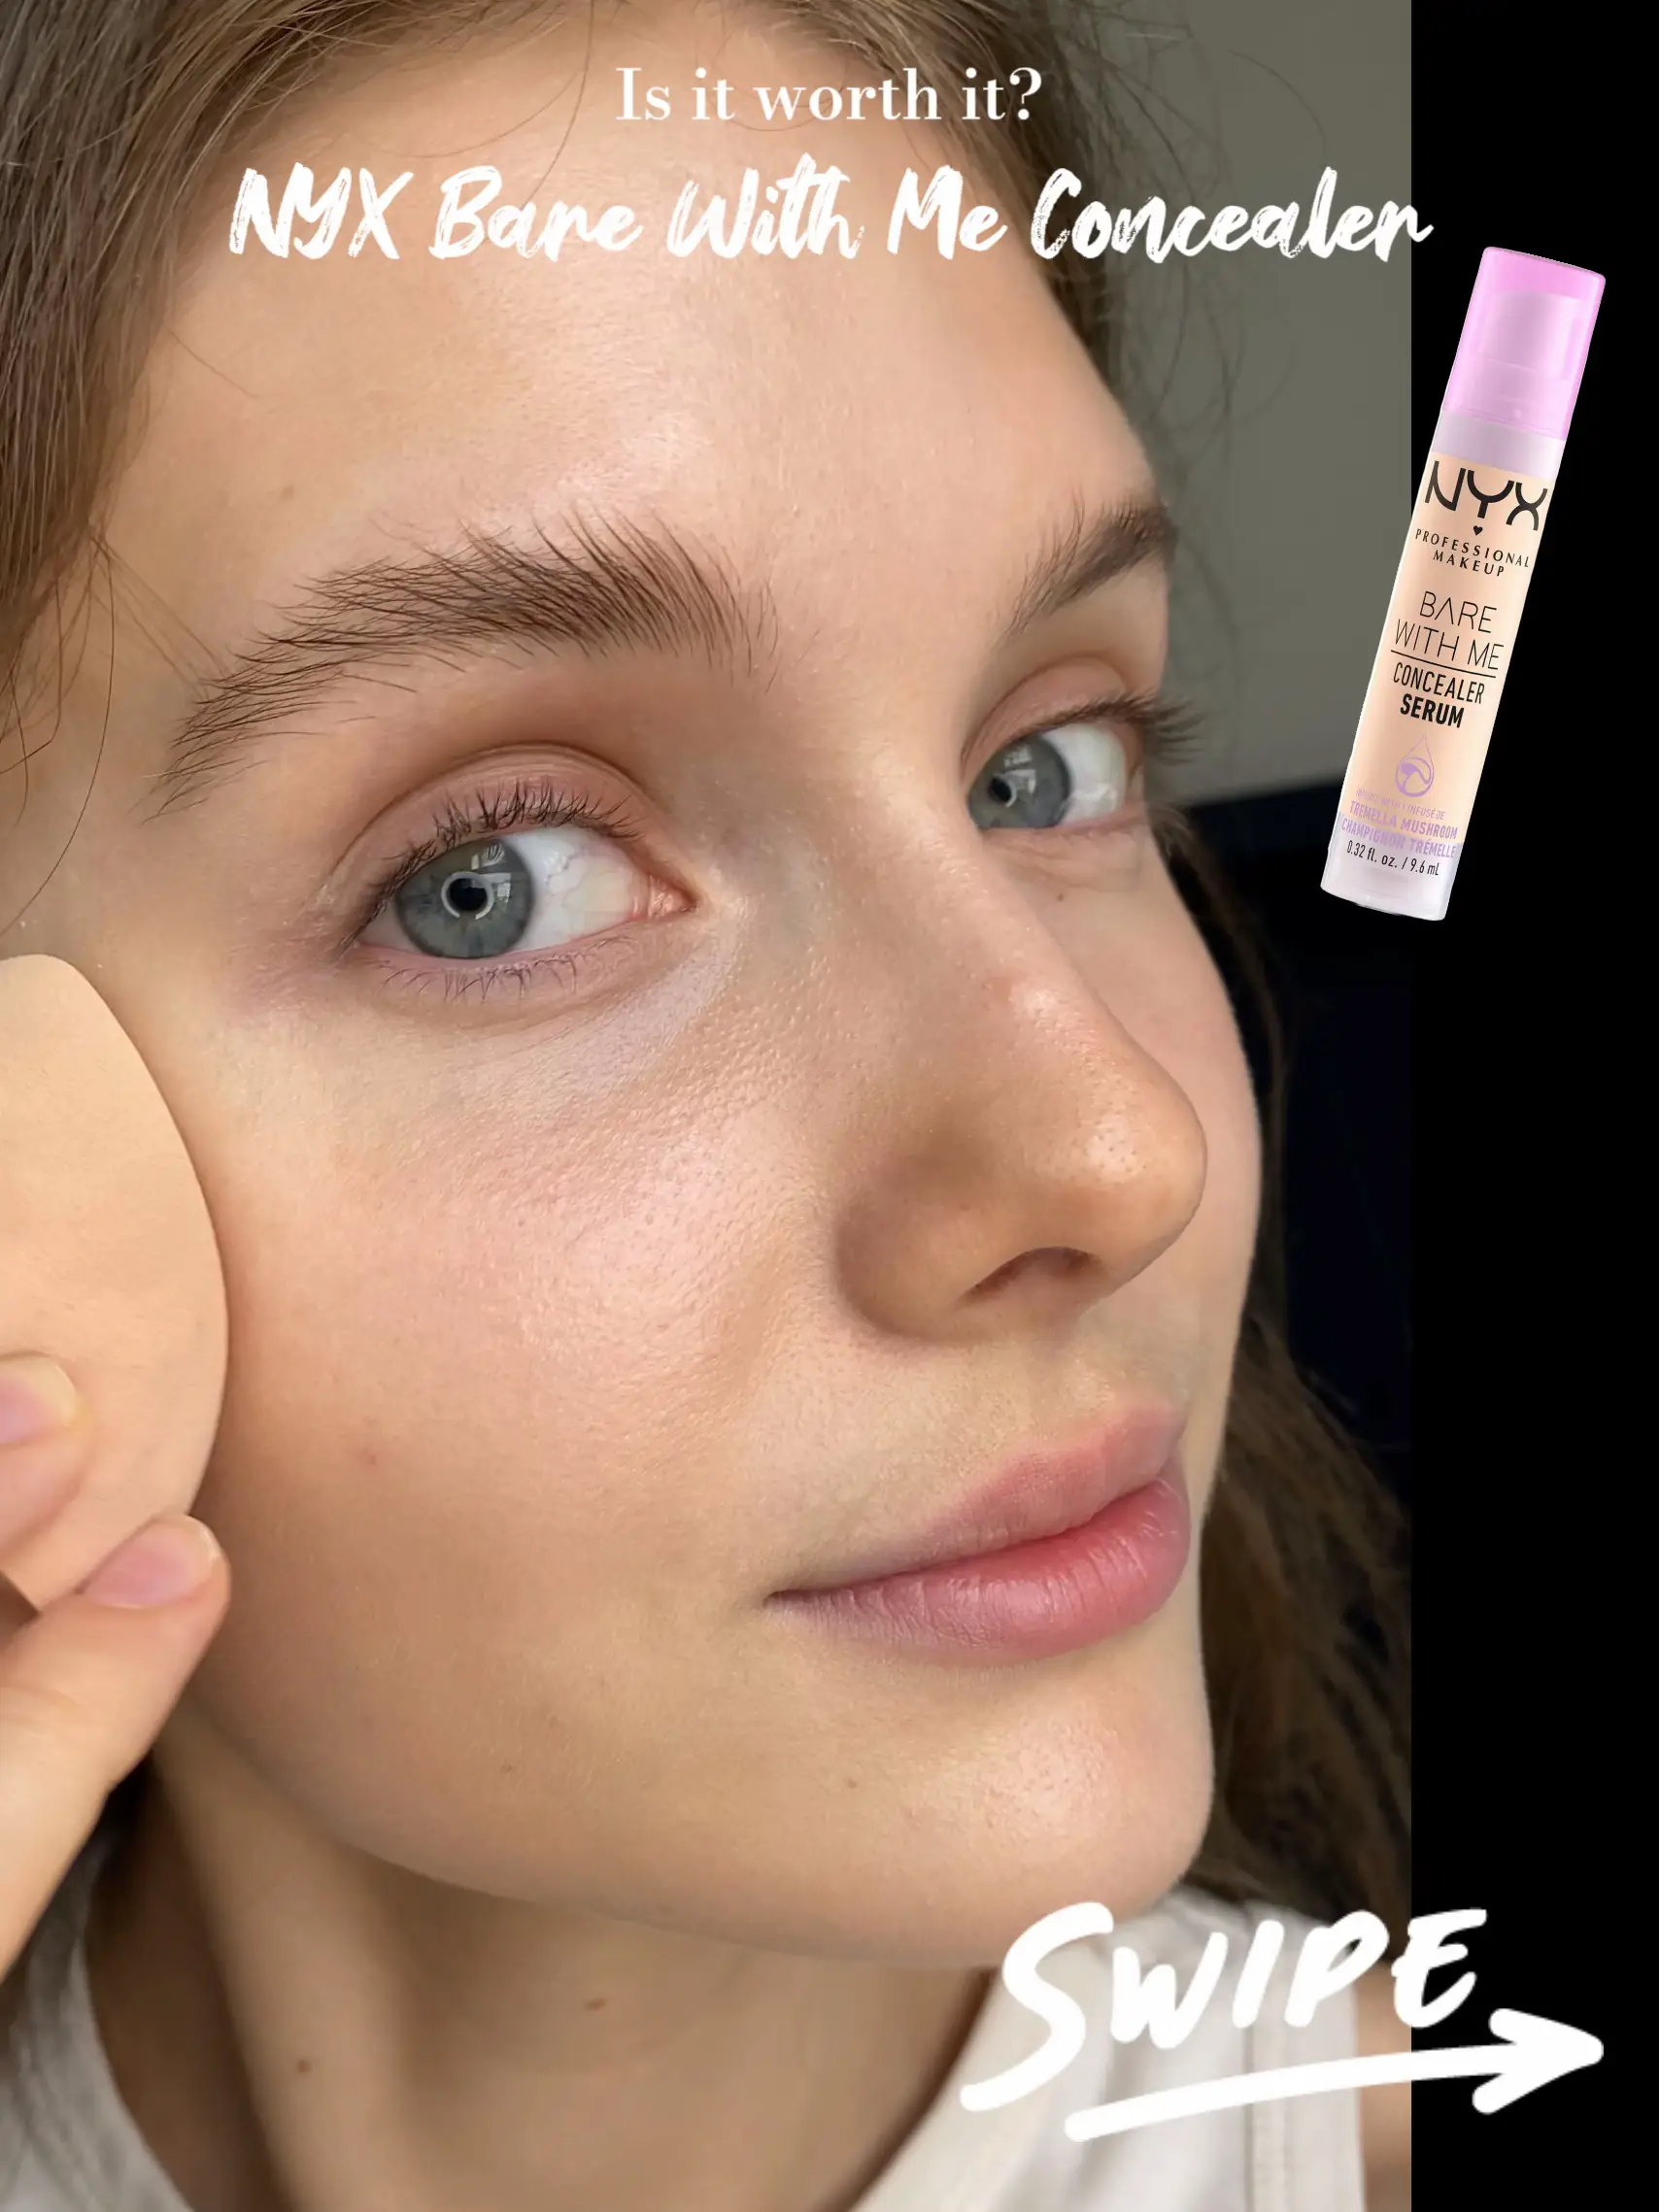 NYX Bare With Me Concealer Gallery | dolcevitamakeup it IT?😱 WORTH | Is posted by Lemon8 